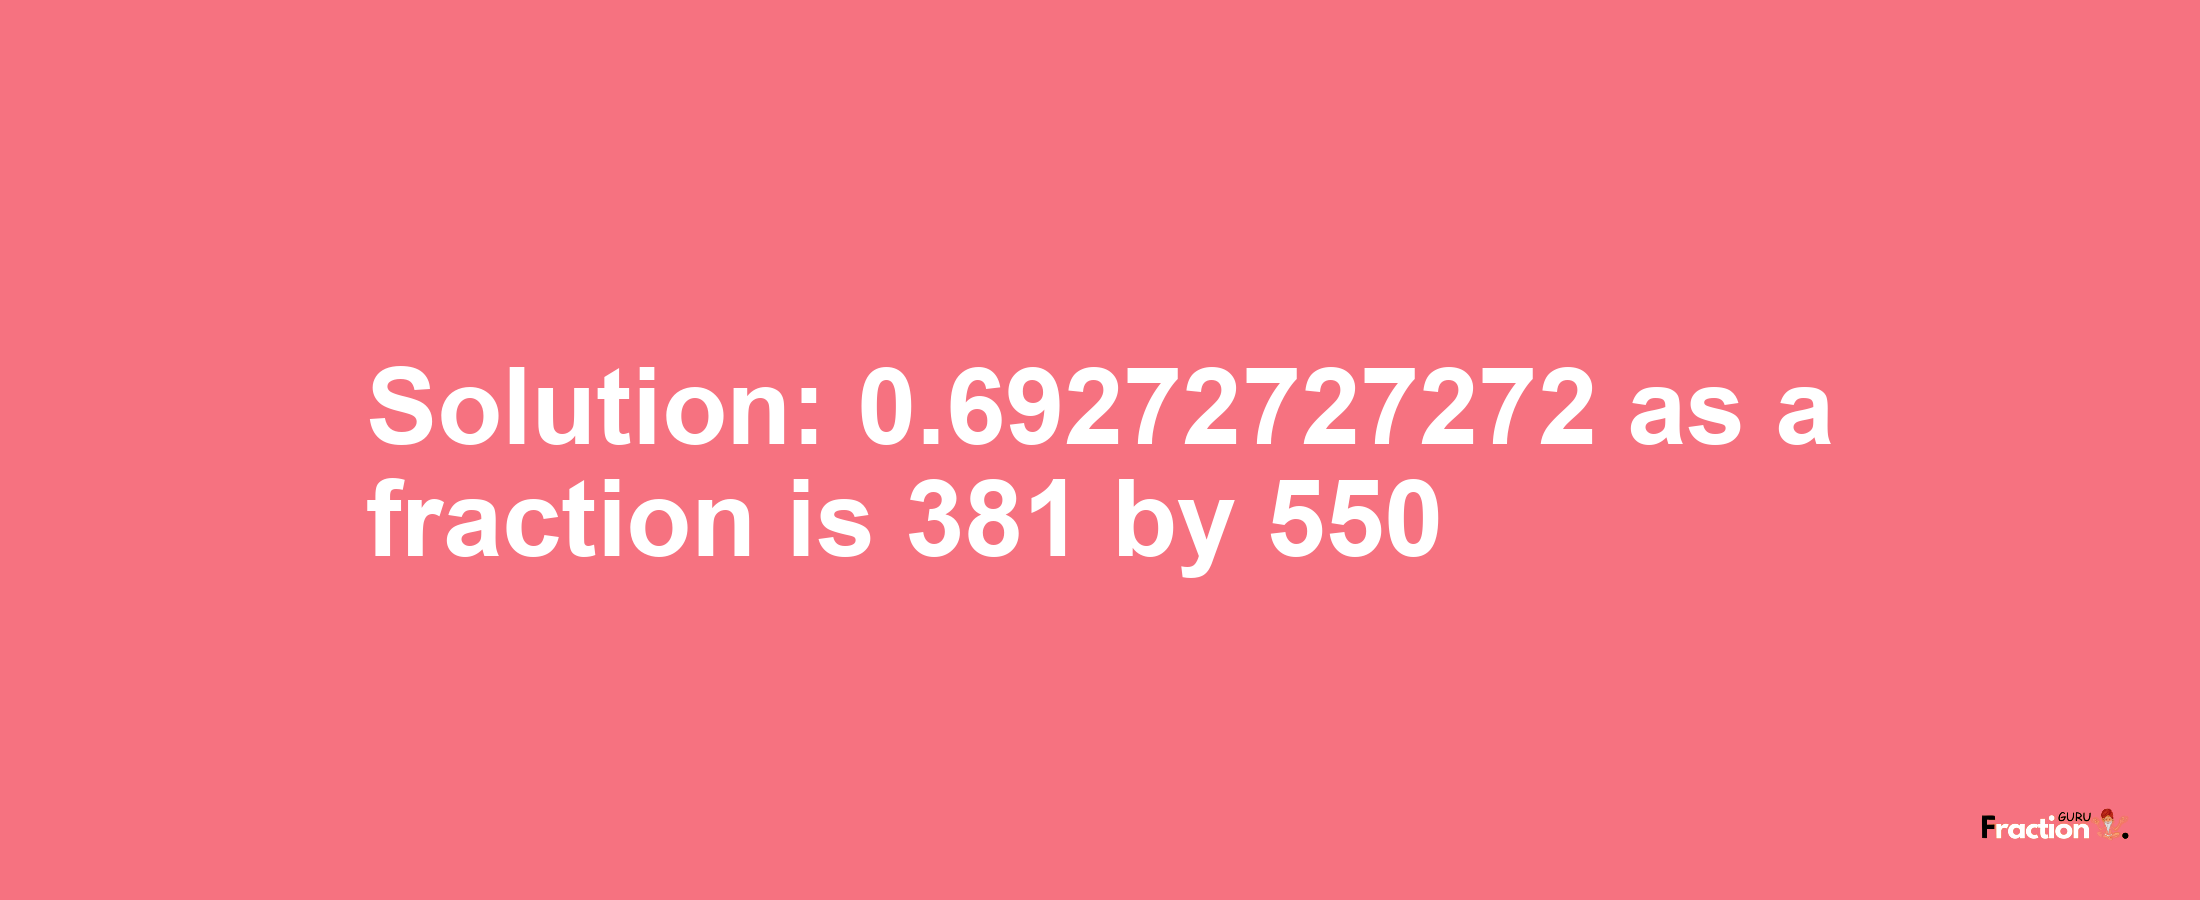 Solution:0.69272727272 as a fraction is 381/550